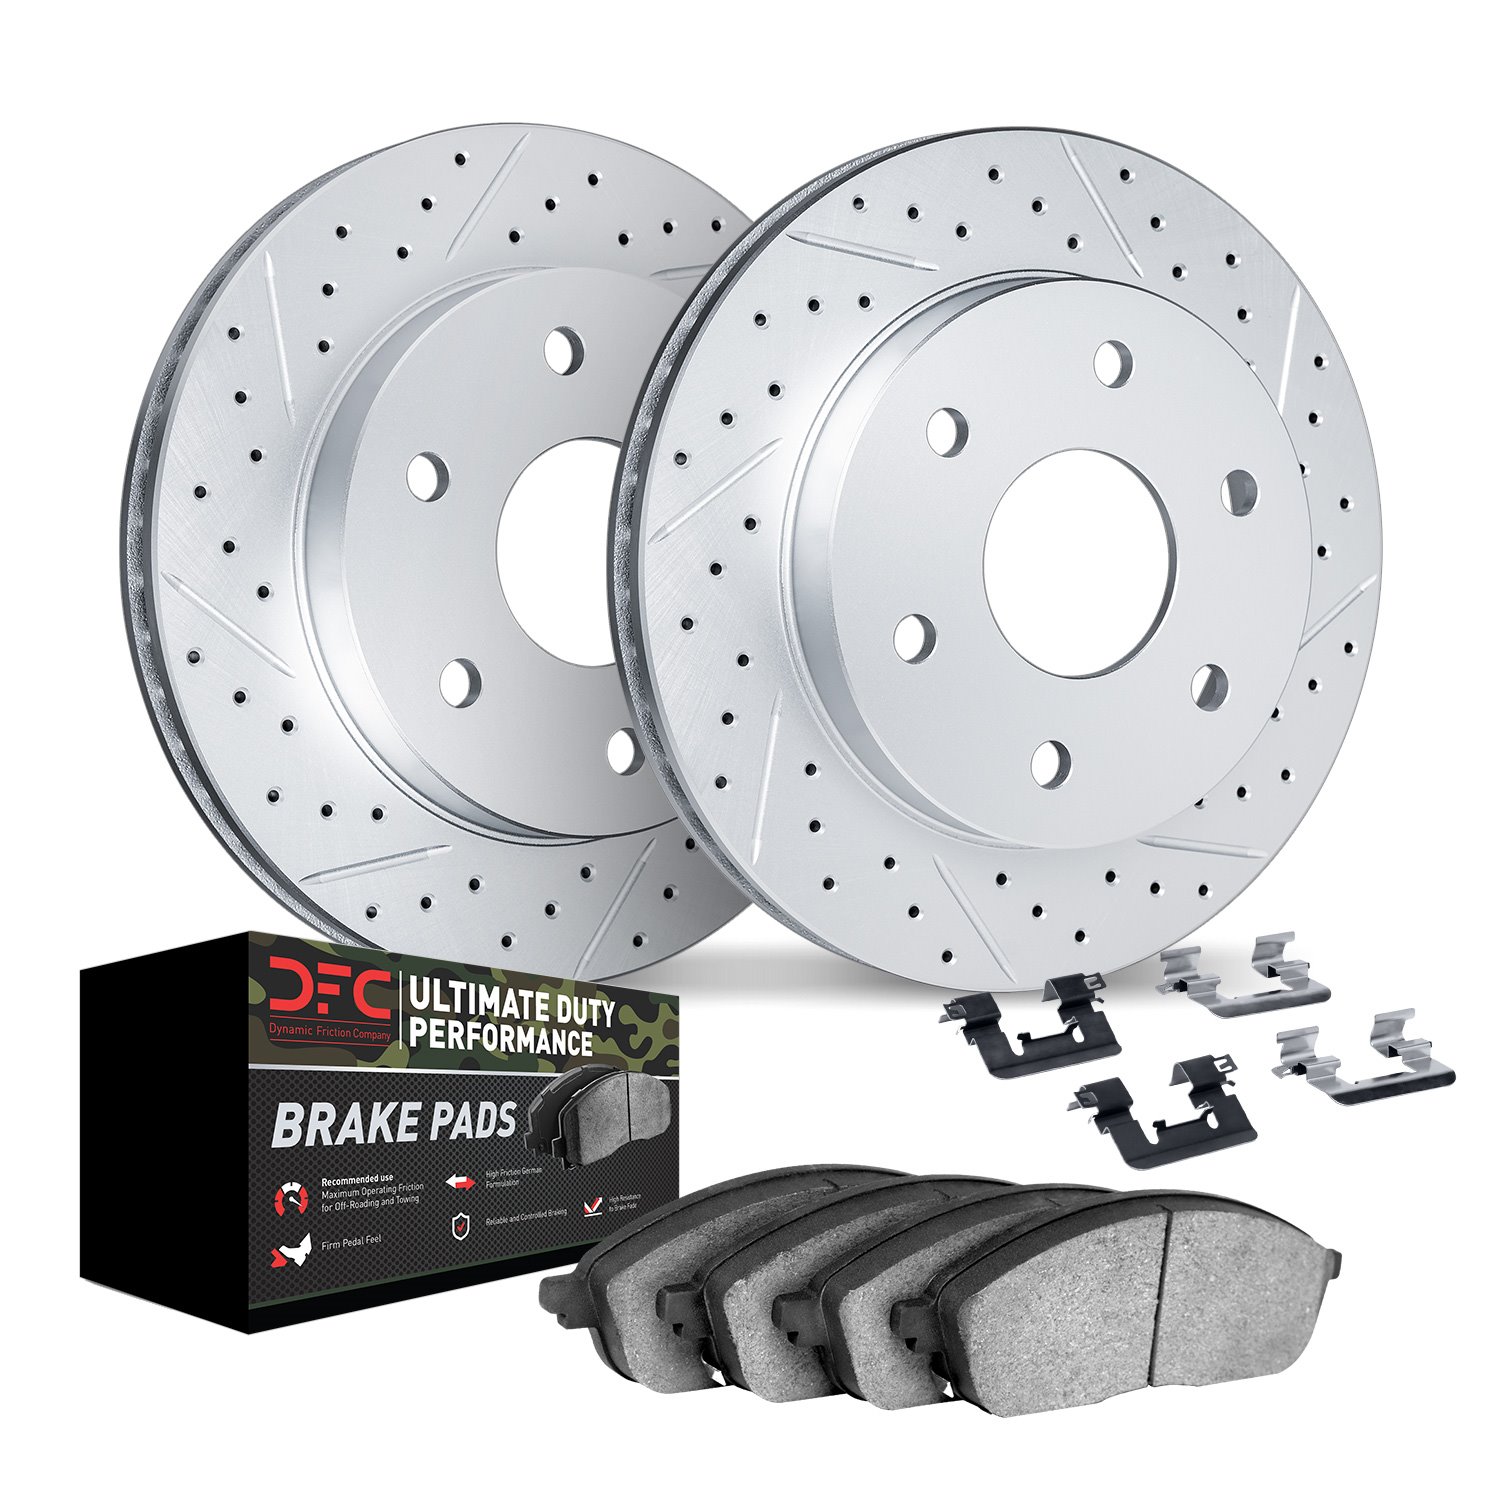 2412-54046 Geoperformance Drilled/Slotted Brake Rotors with Ultimate-Duty Brake Pads Kit & Hardware, 2004-2008 Ford/Lincoln/Merc